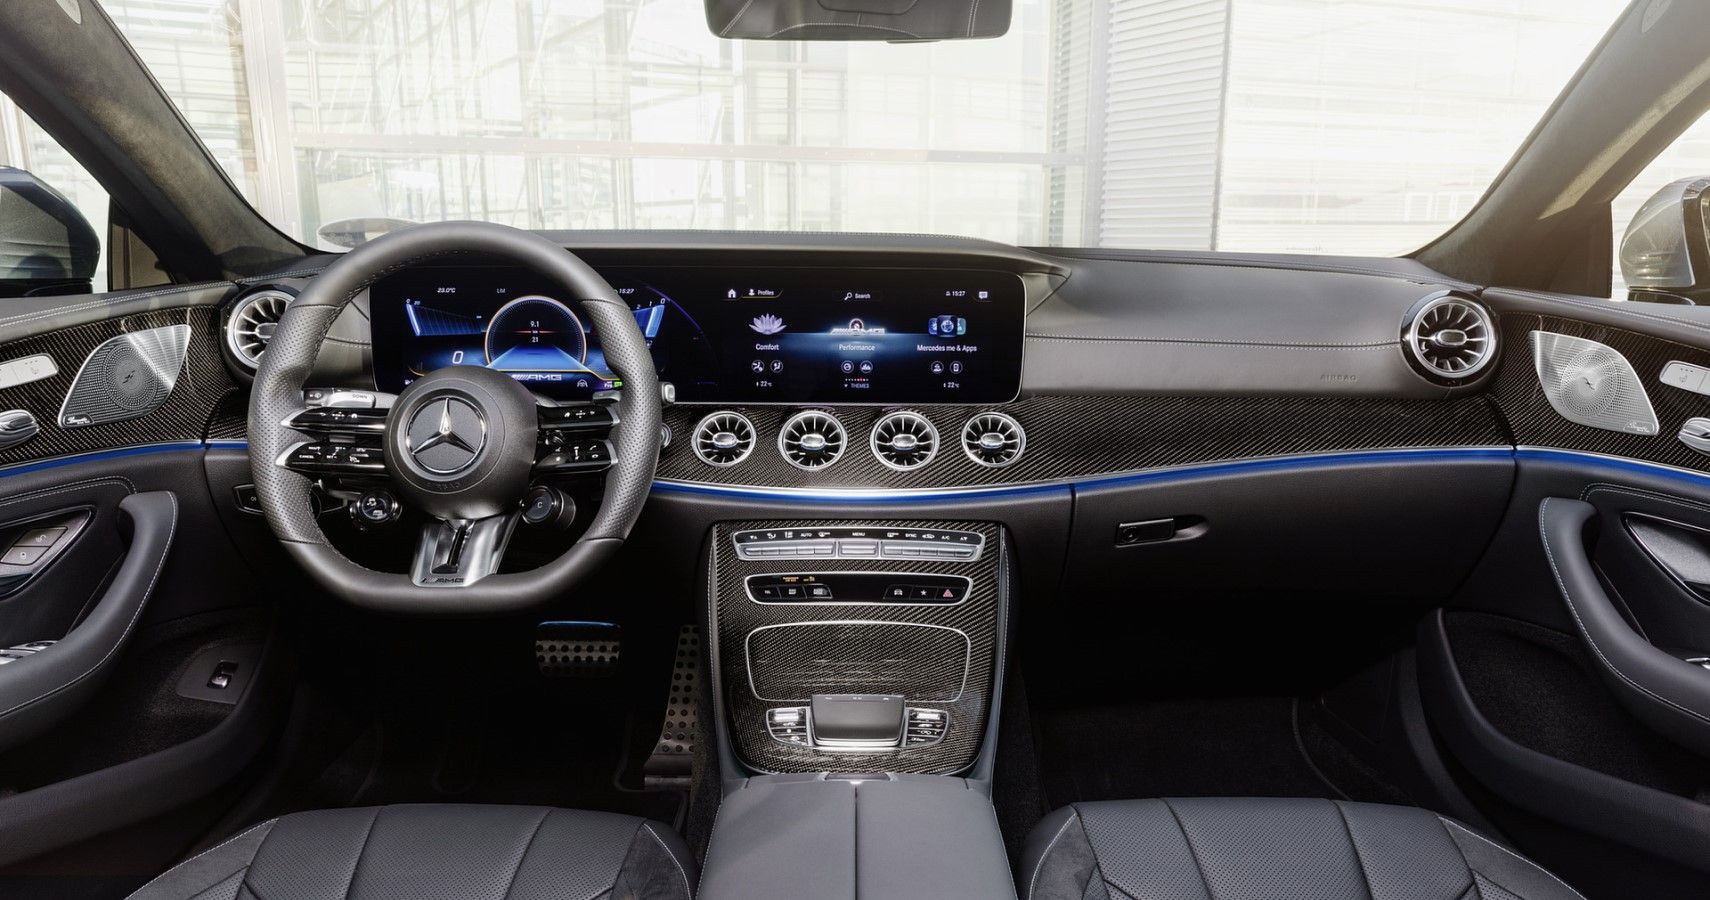 2022 Mercedes-AMG CLS 53 dashboard layout view